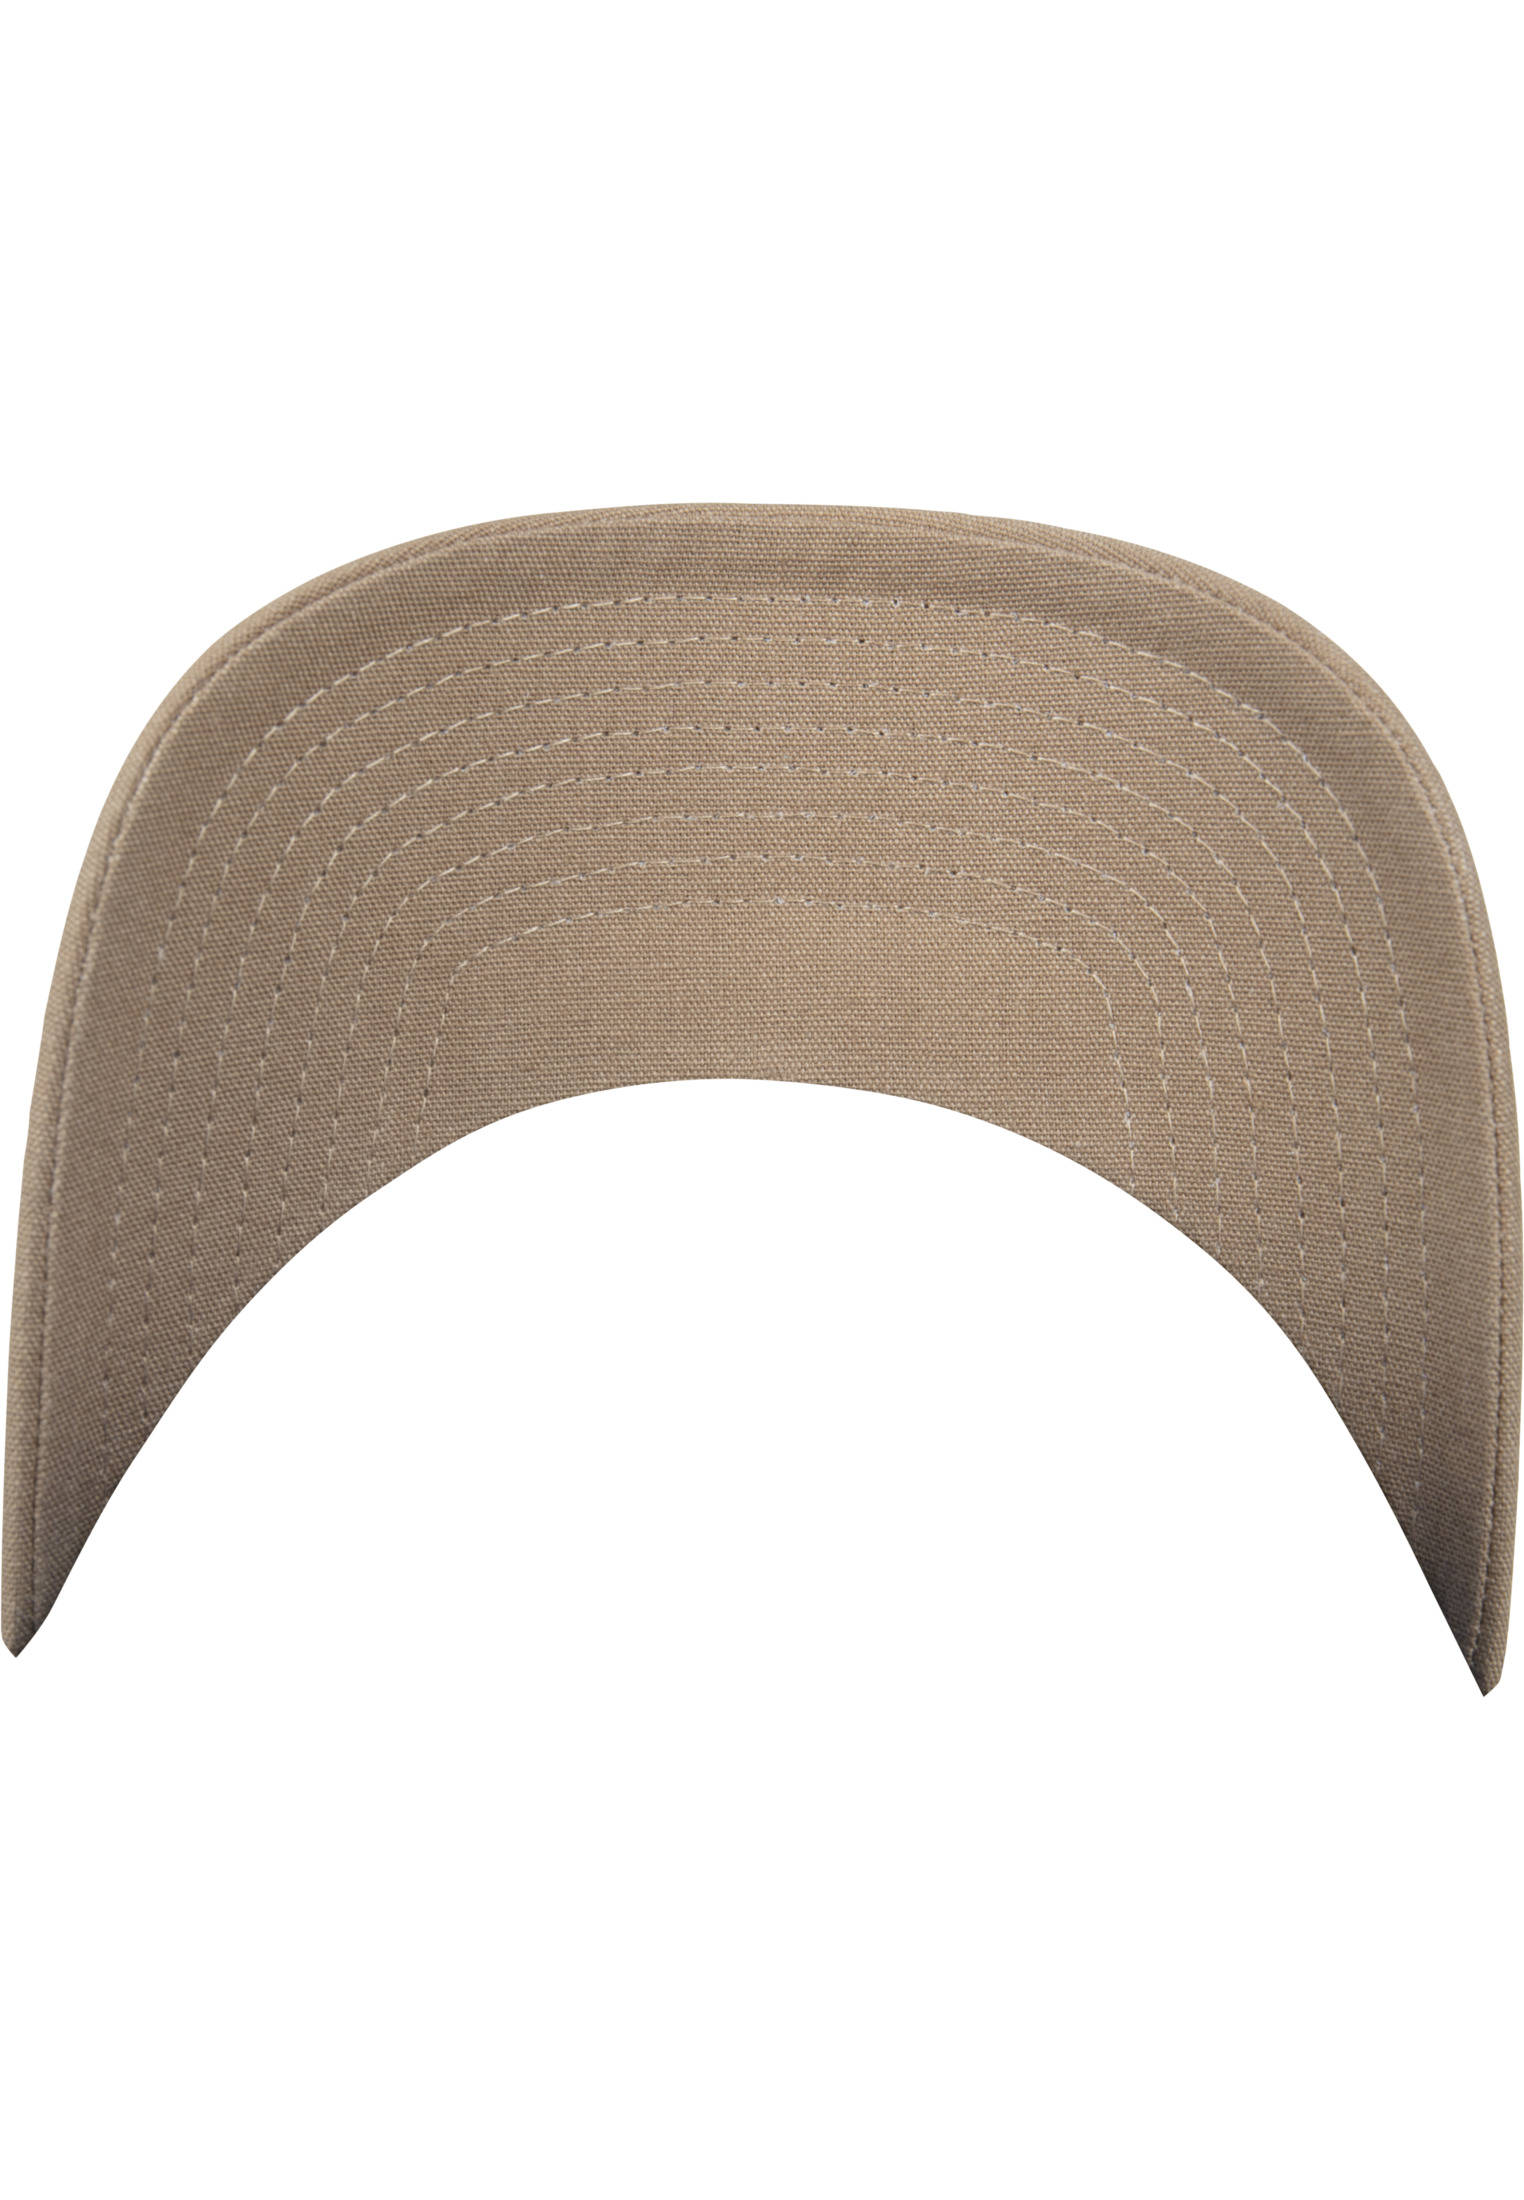 Metal 6-Panel Curved Snap-7708MS